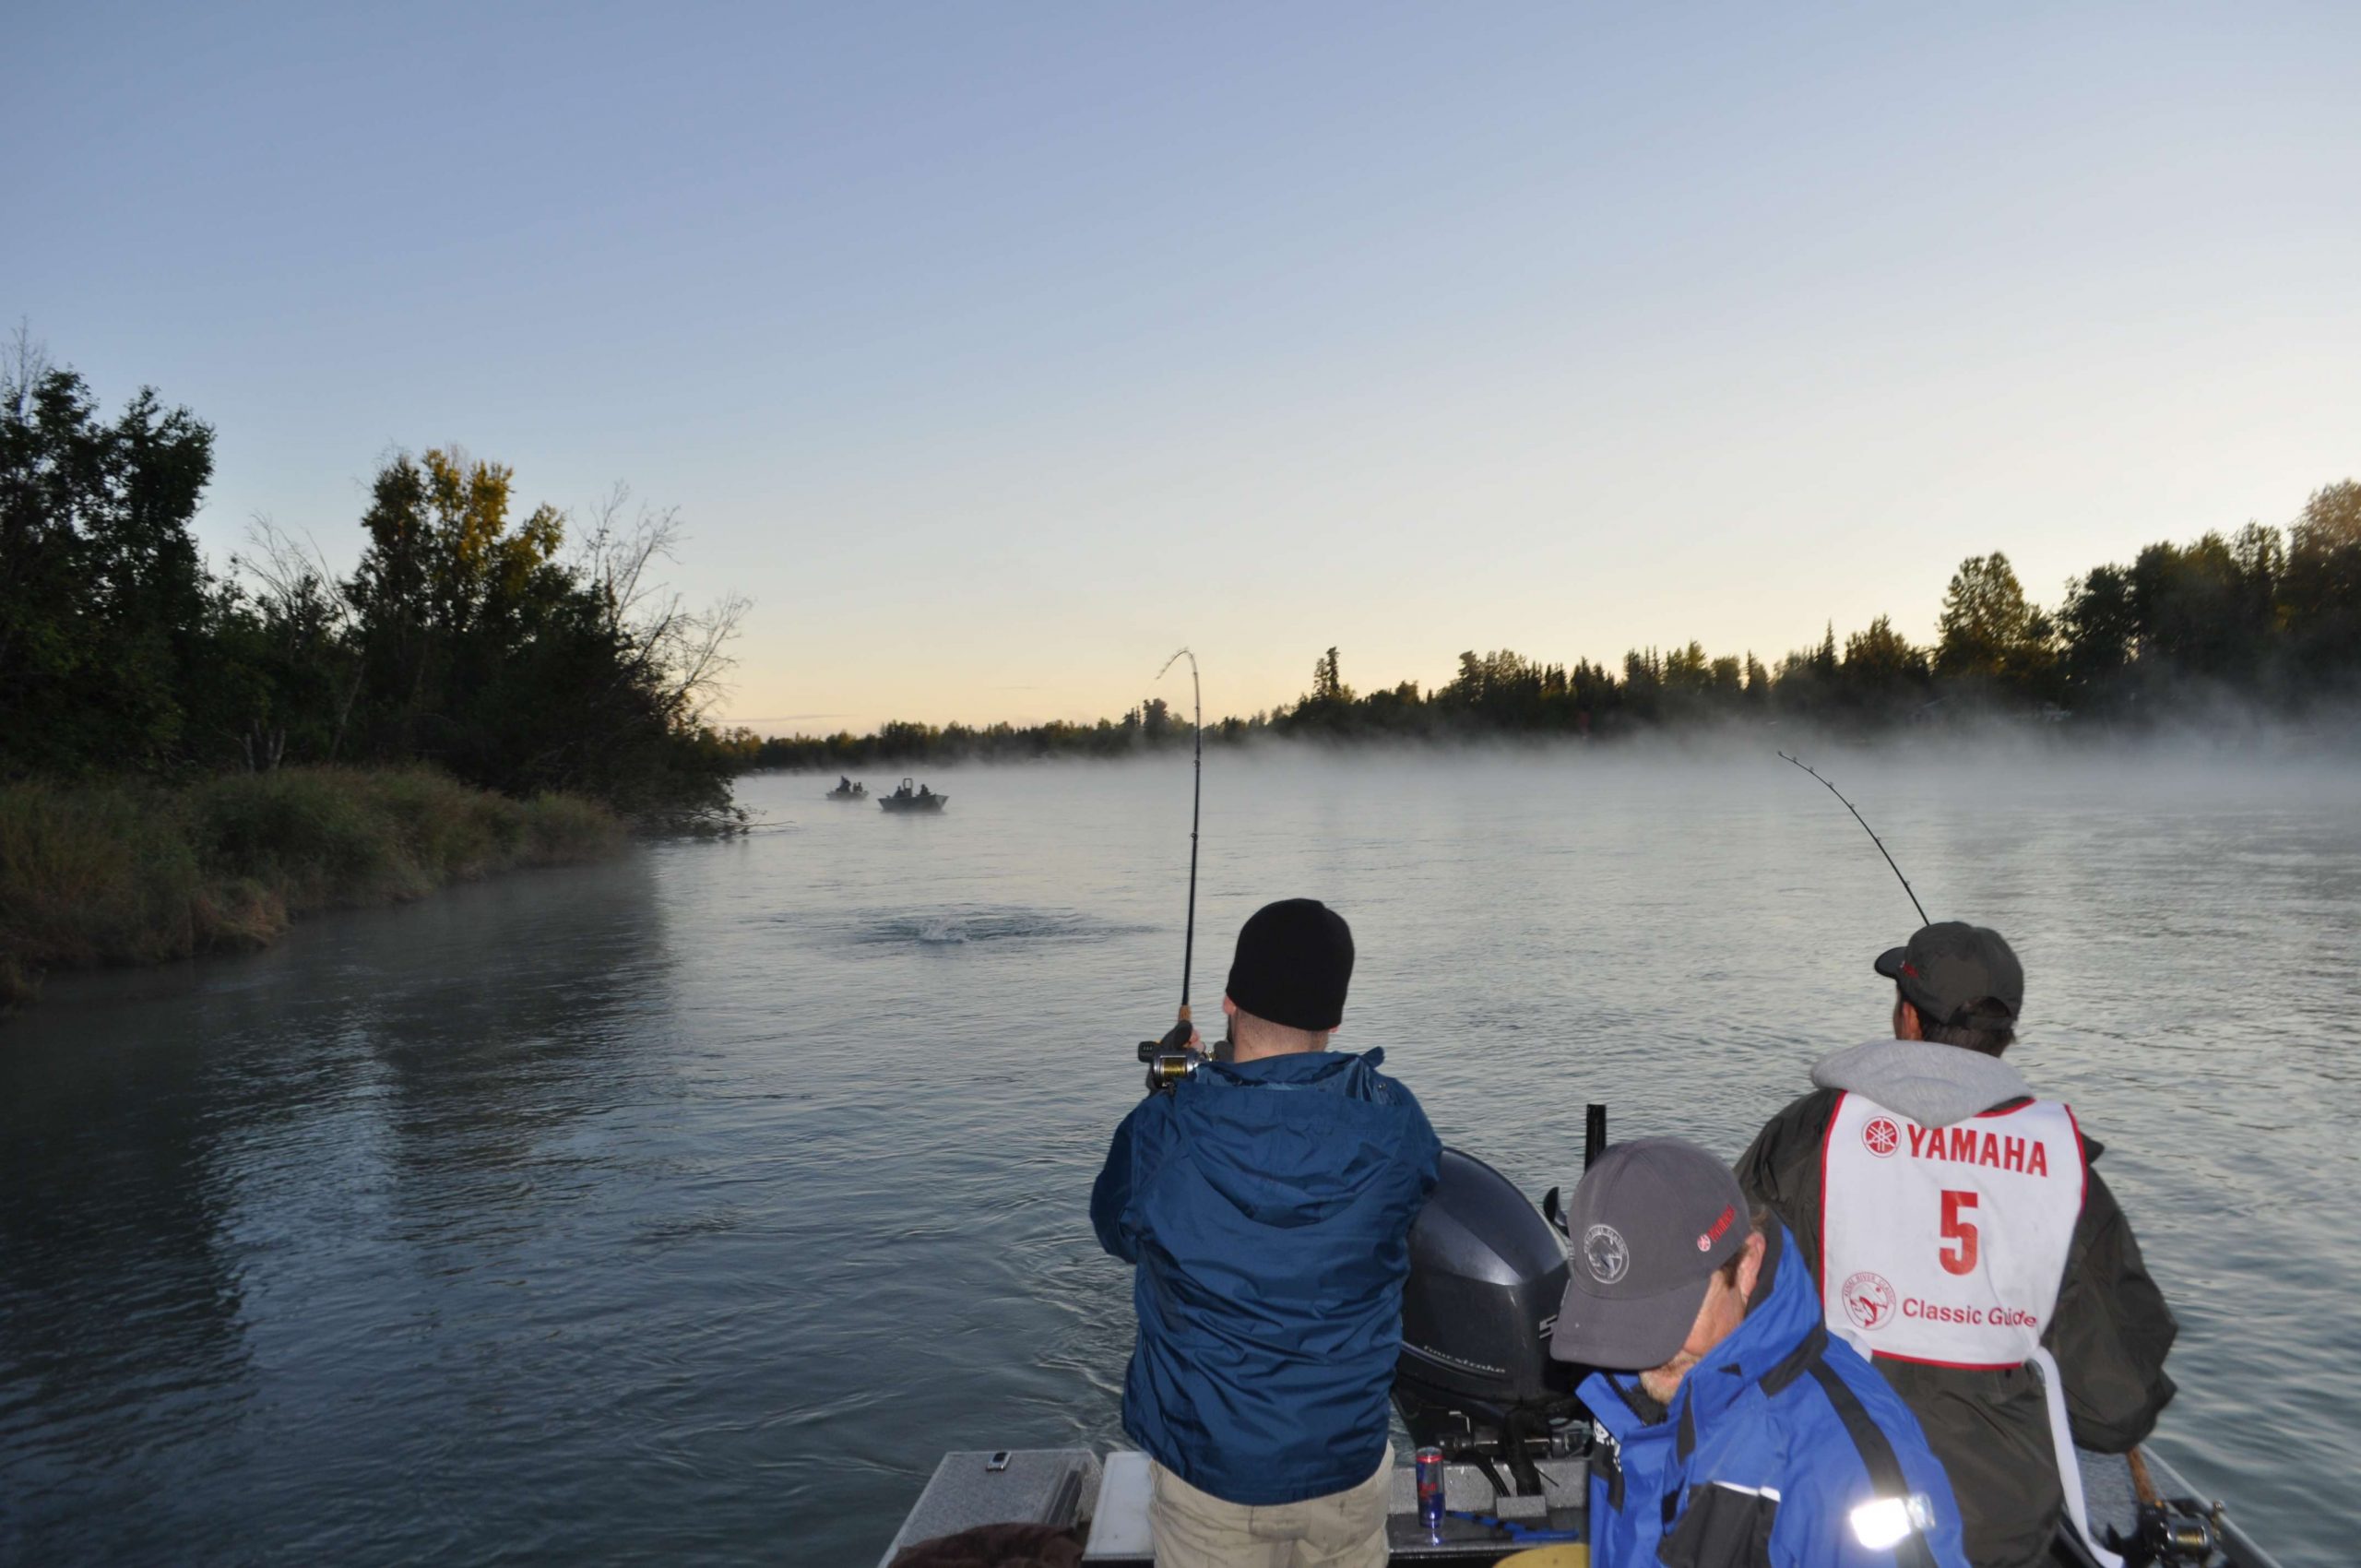 An angler battles a big silver salmon during the Kenai River Classic, a fundraising event for conservation projects of the Kenai River Sportfishing Association (KSRA).